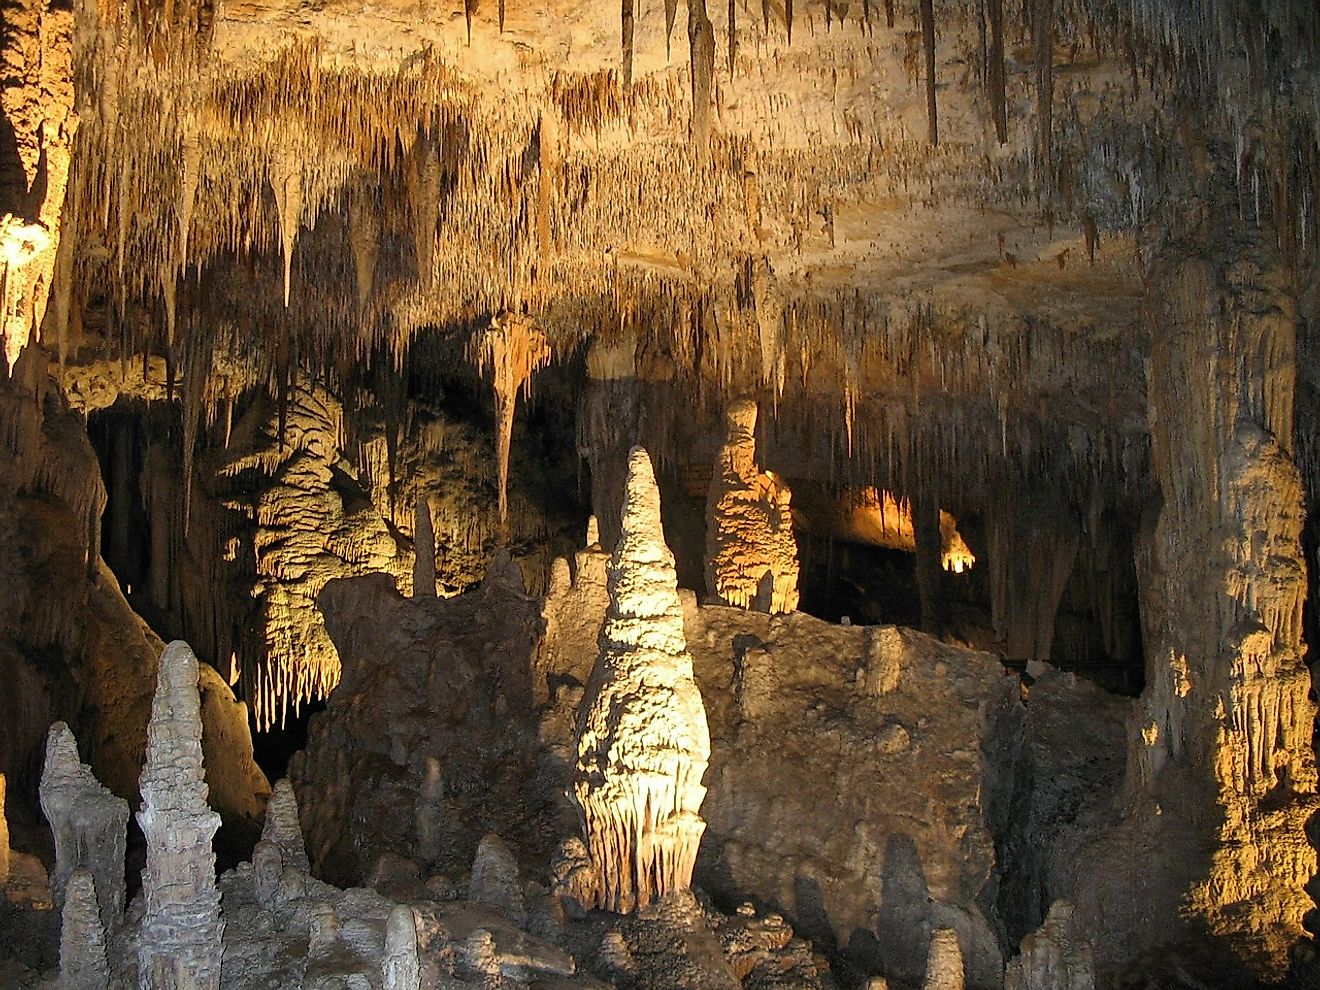 Stalagmites in a cave.